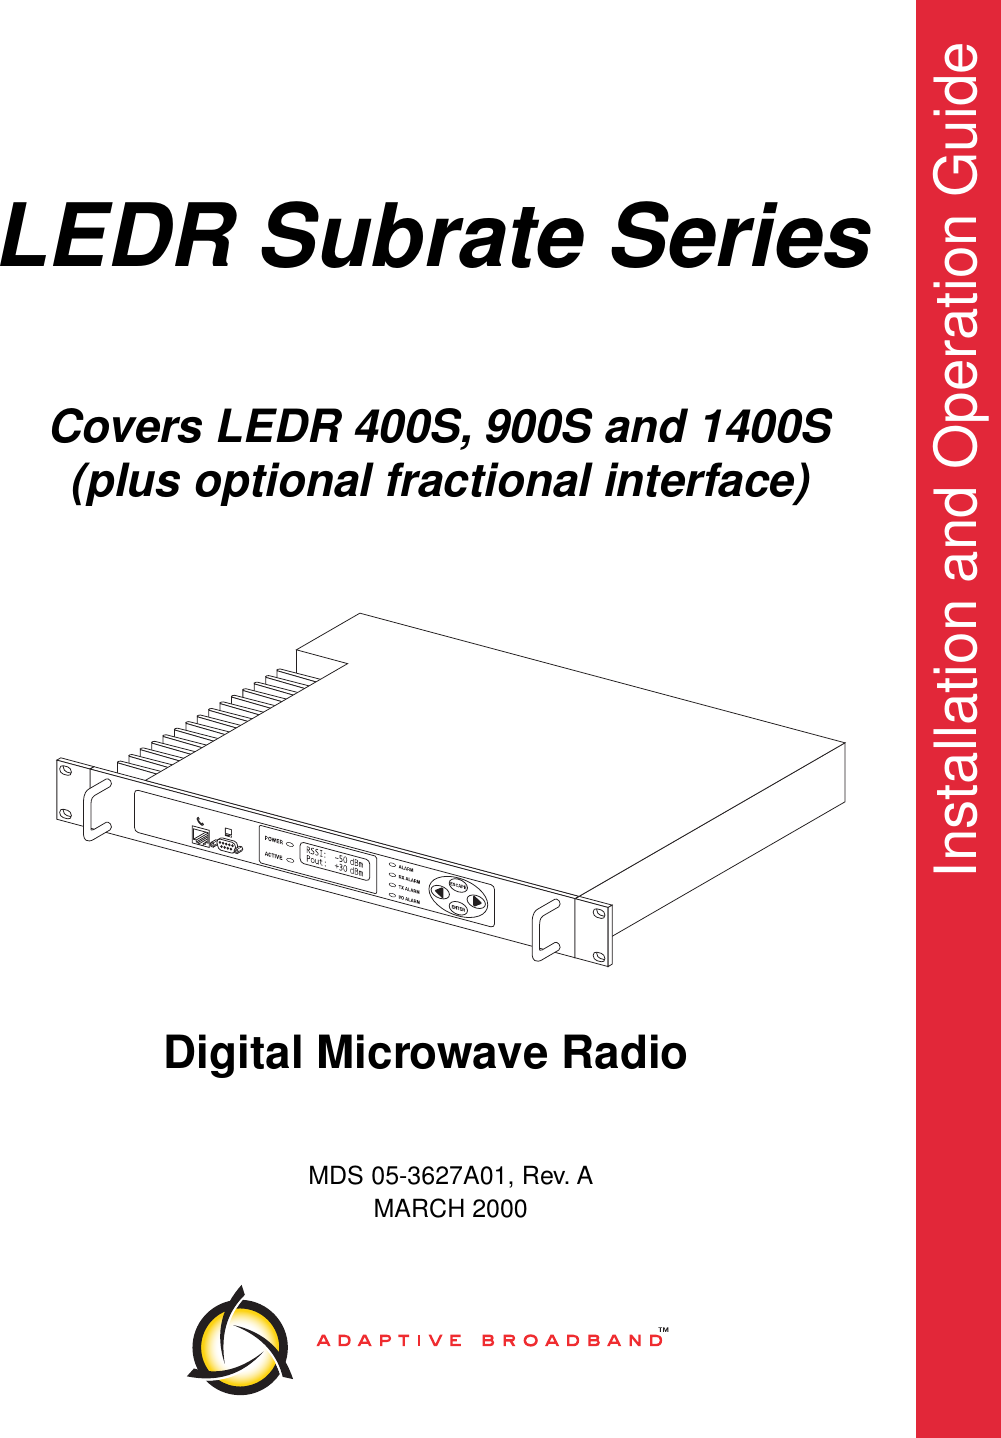  Installation and Operation Guide MDS 05-3627A01, Rev. AMARCH 2000 Digital Microwave Radio  LEDR Subrate Series Covers LEDR 400S, 900S and 1400S (plus optional fractional interface)